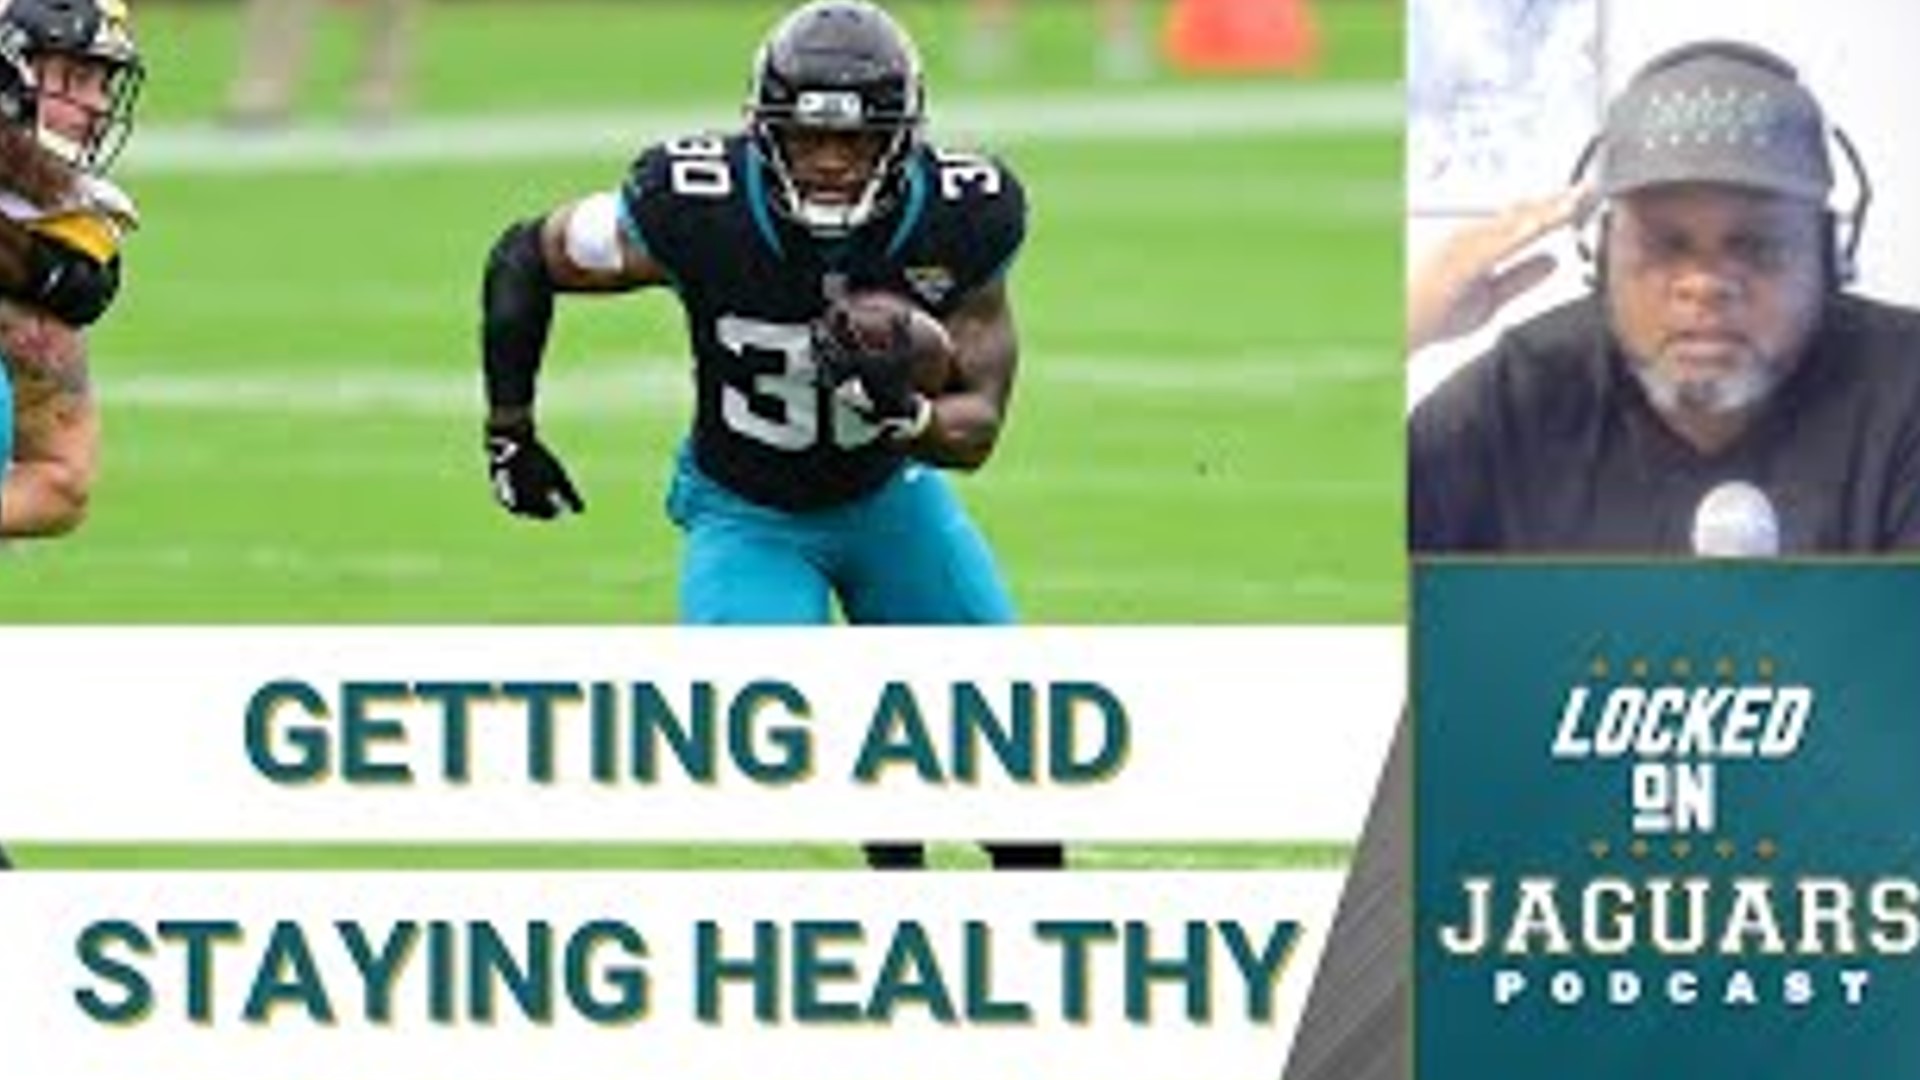 The Jacksonville Jaguars continued off season scheduled workouts with a couple of non starters being helped off the field due to injury.